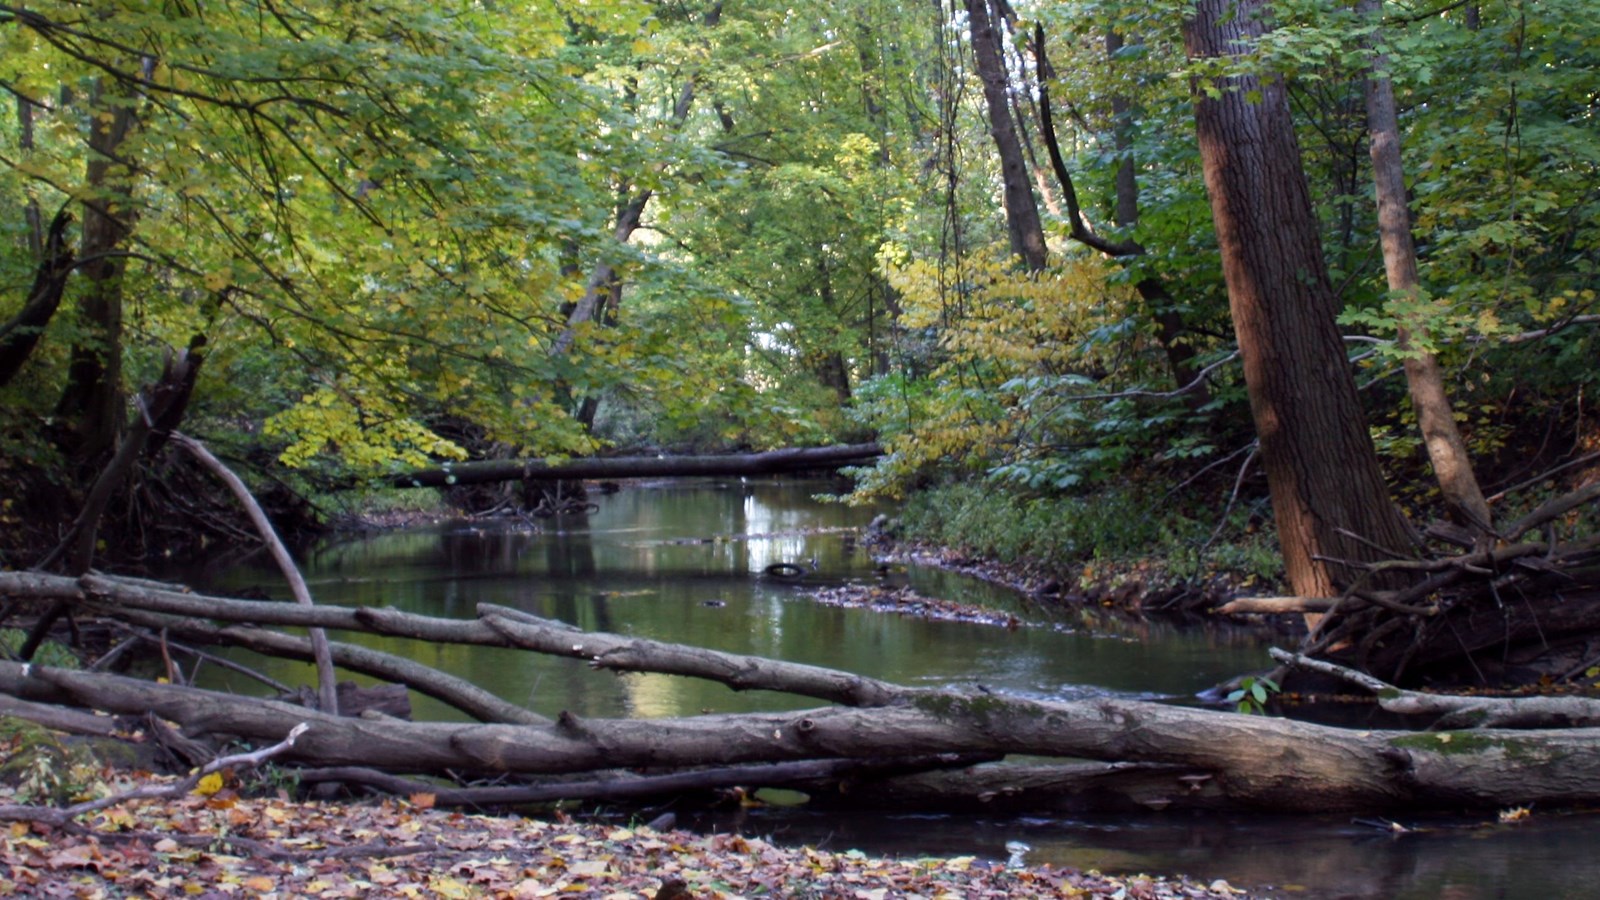 A log lays across the banks of the Little Calumet River.